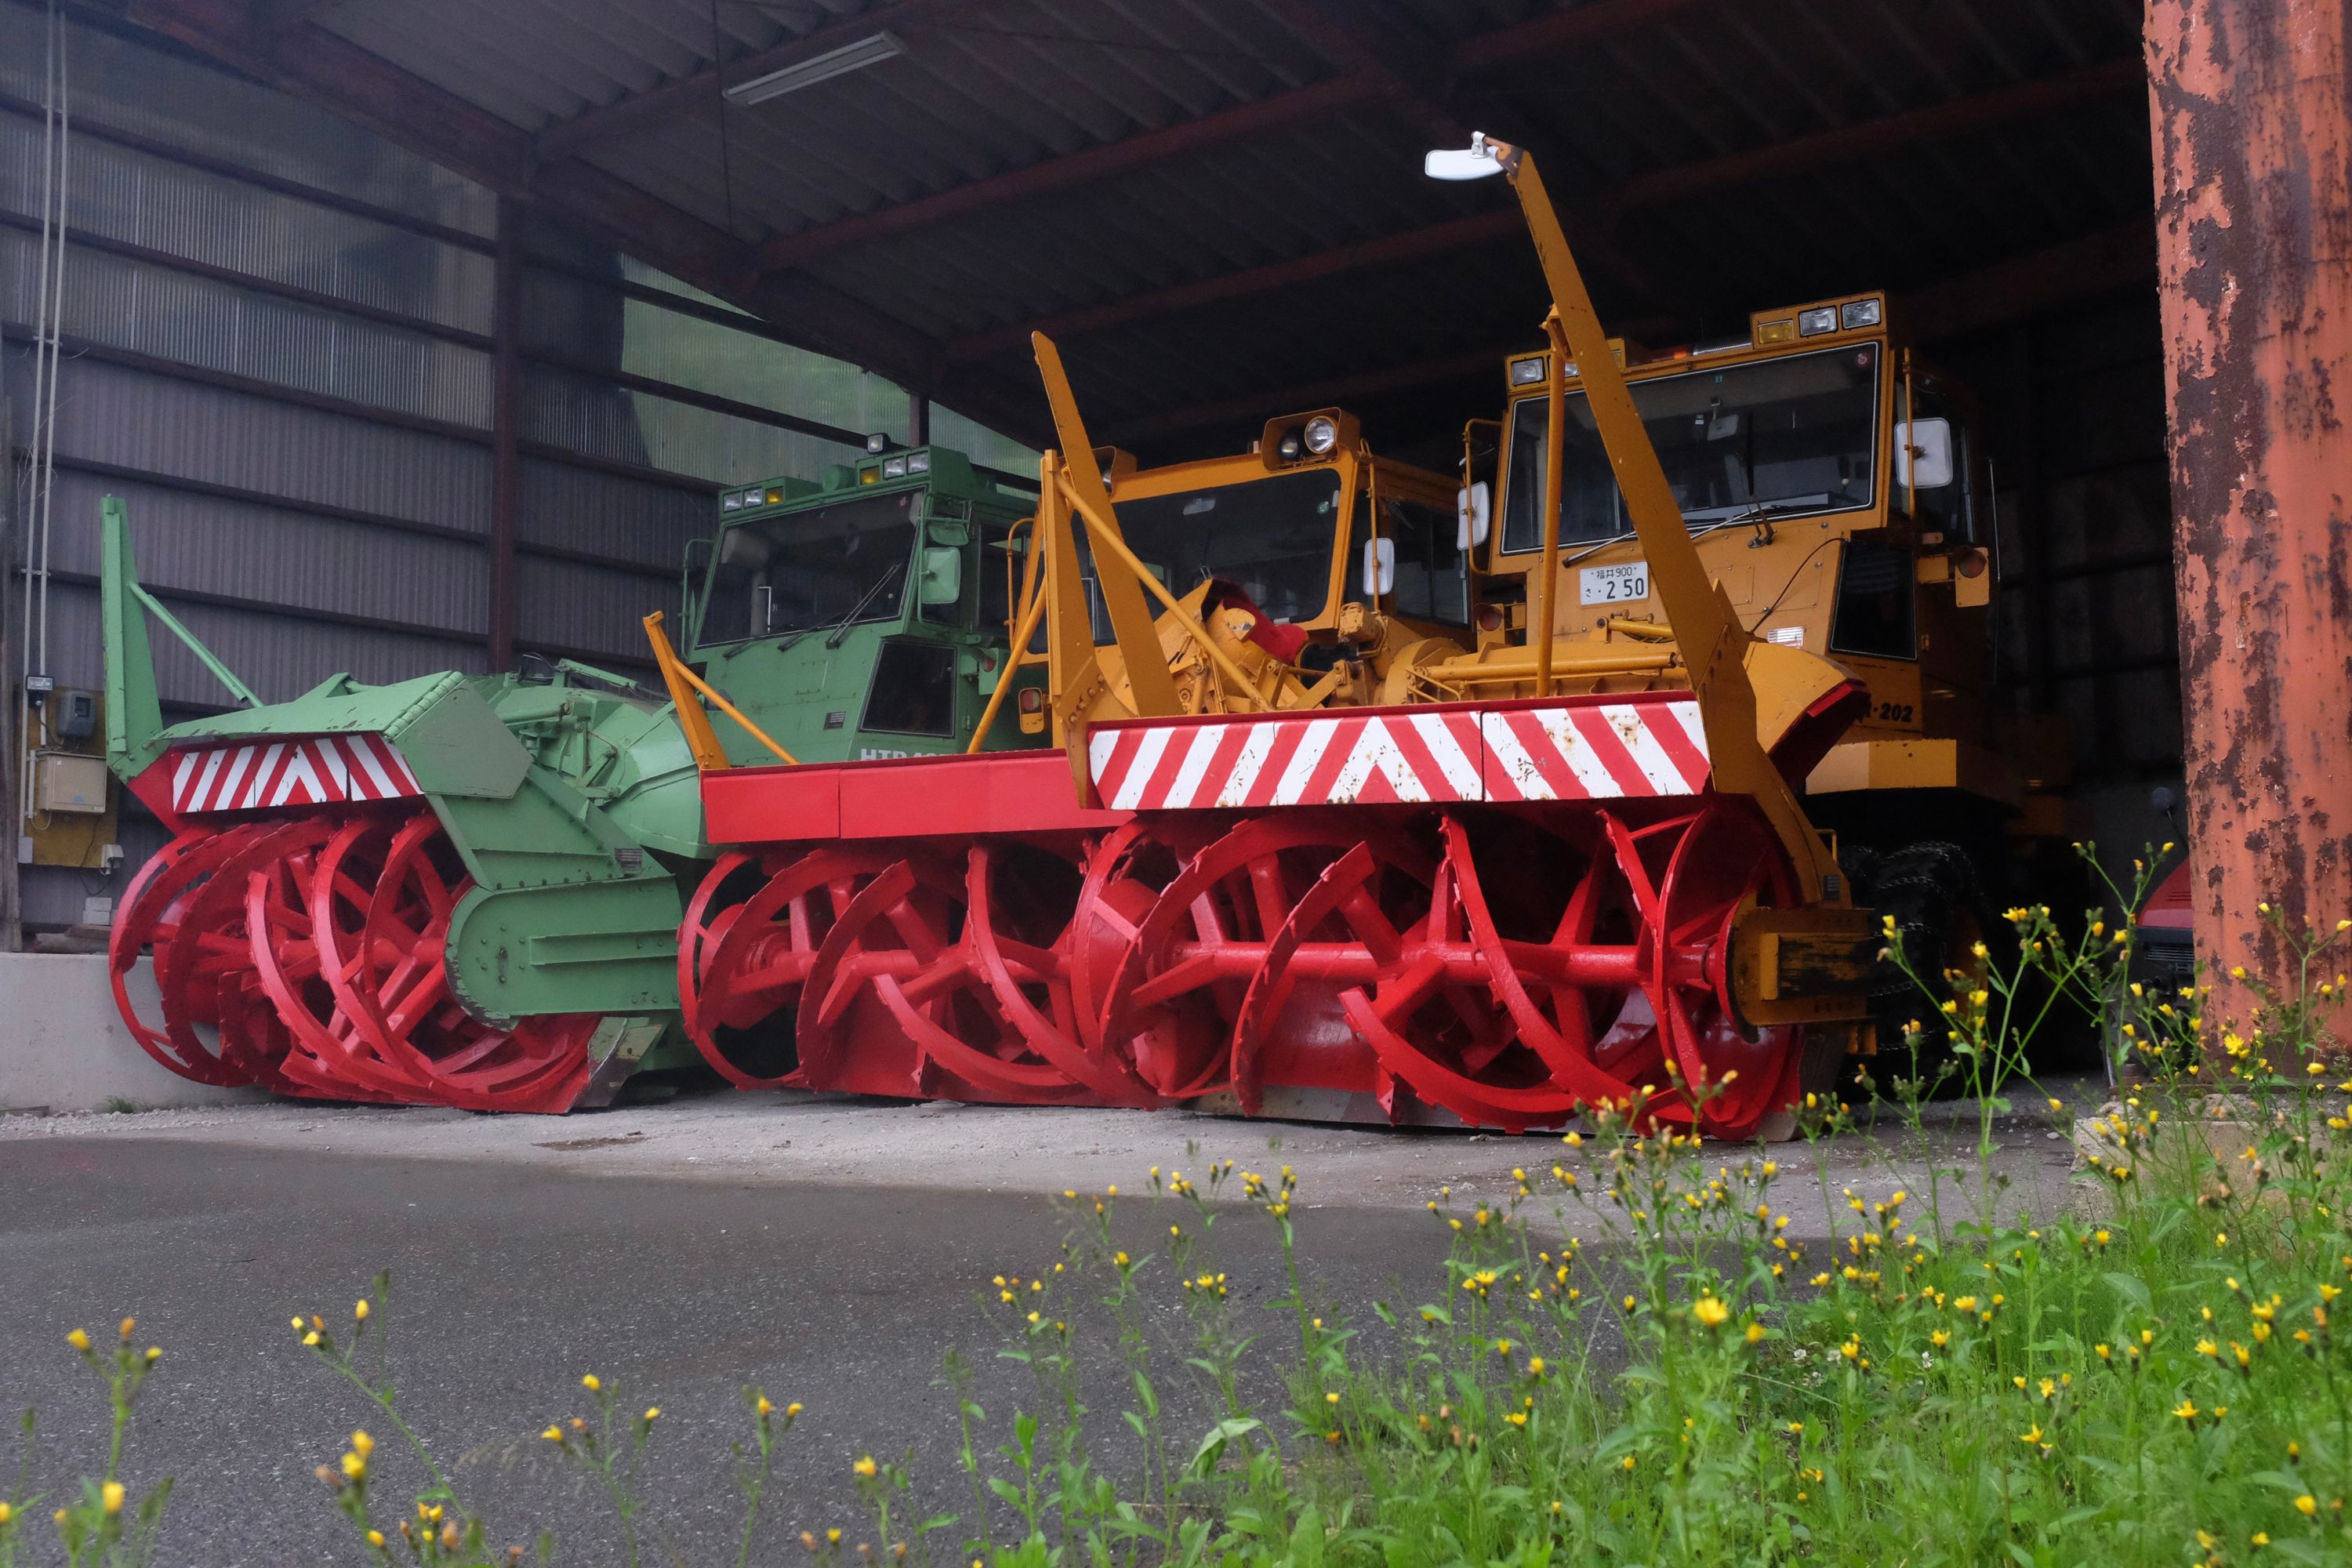 Green and yellow snowplows in an open garage.